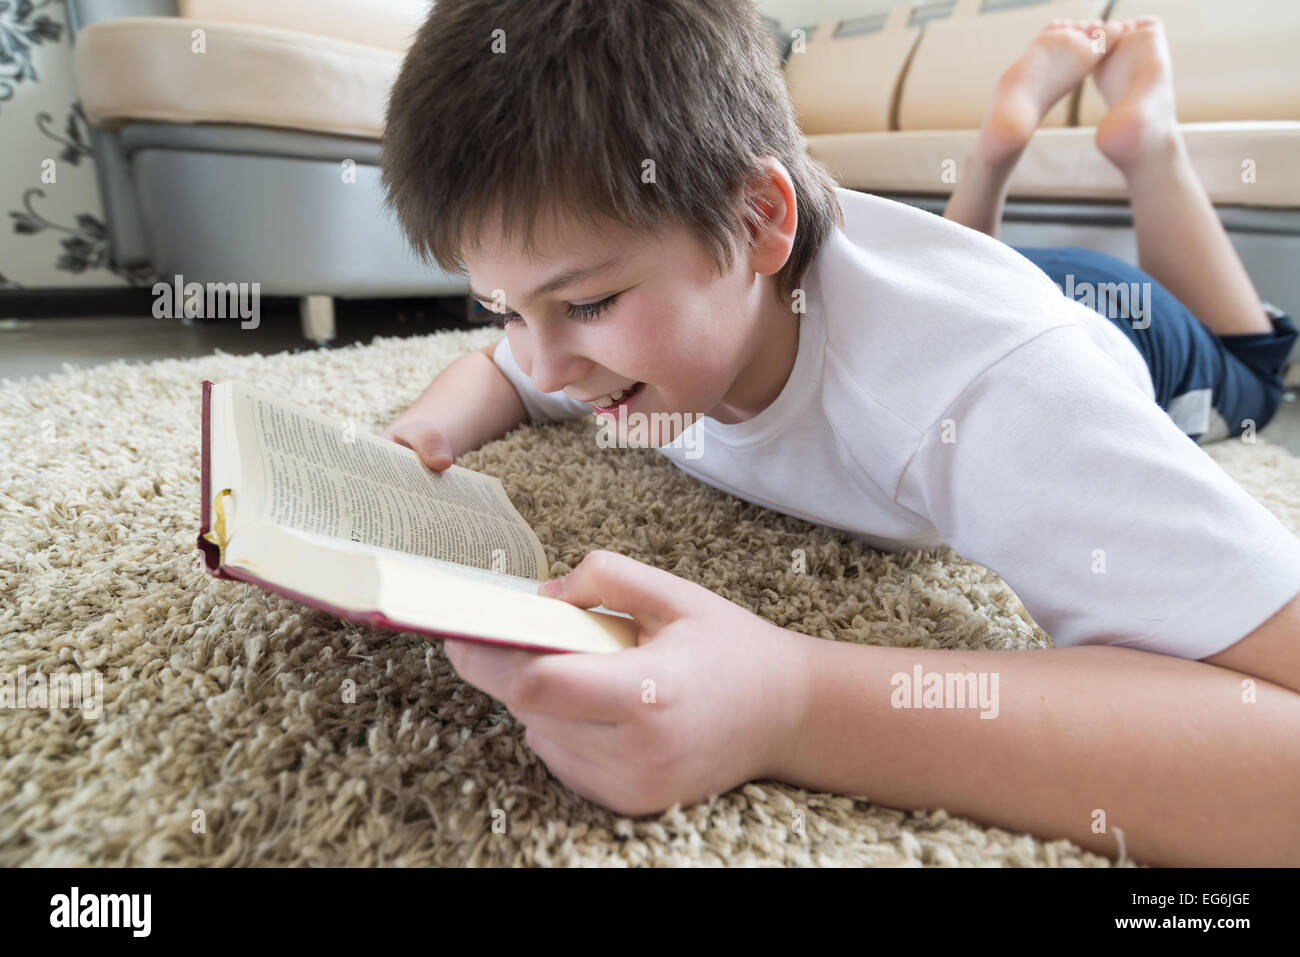 Boy reading a book while lying on  carpet in the room Stock Photo